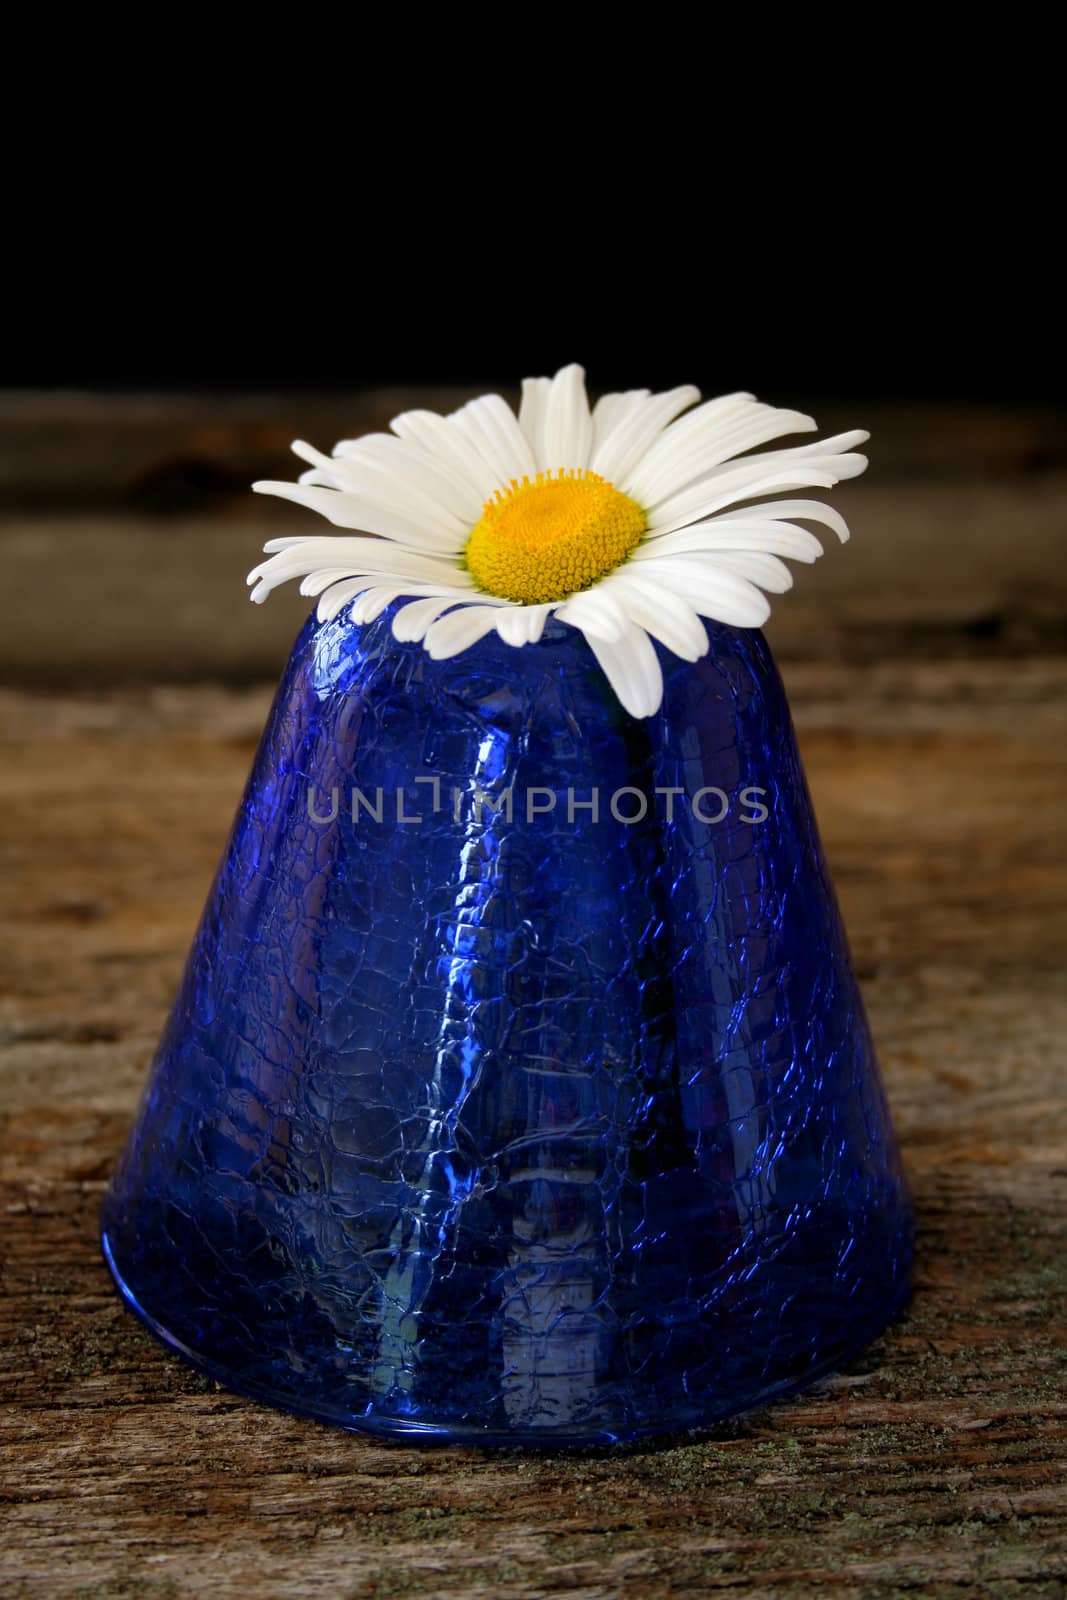 A single daisy in a blue vase sitting on an old piece of wood.